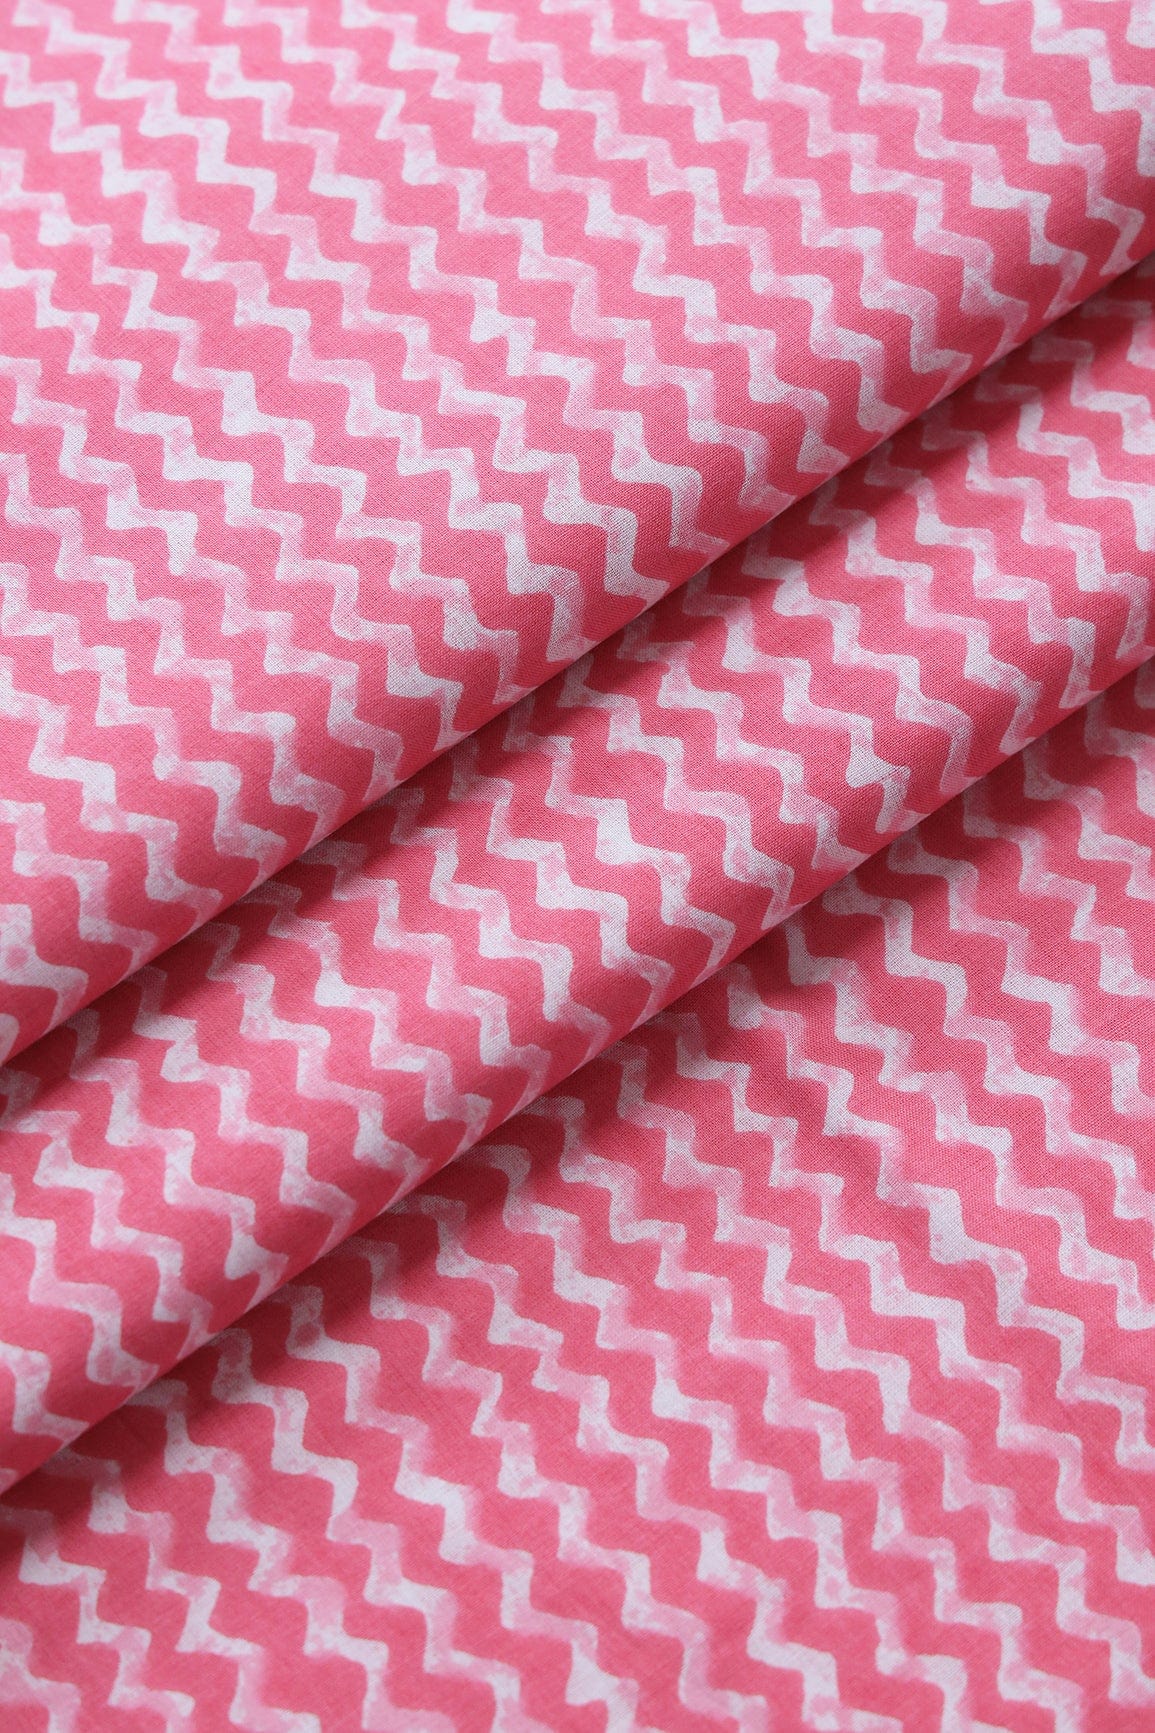 doeraa Prints Hot Pink And White Chevron Print On Pure Mul Cotton Fabric